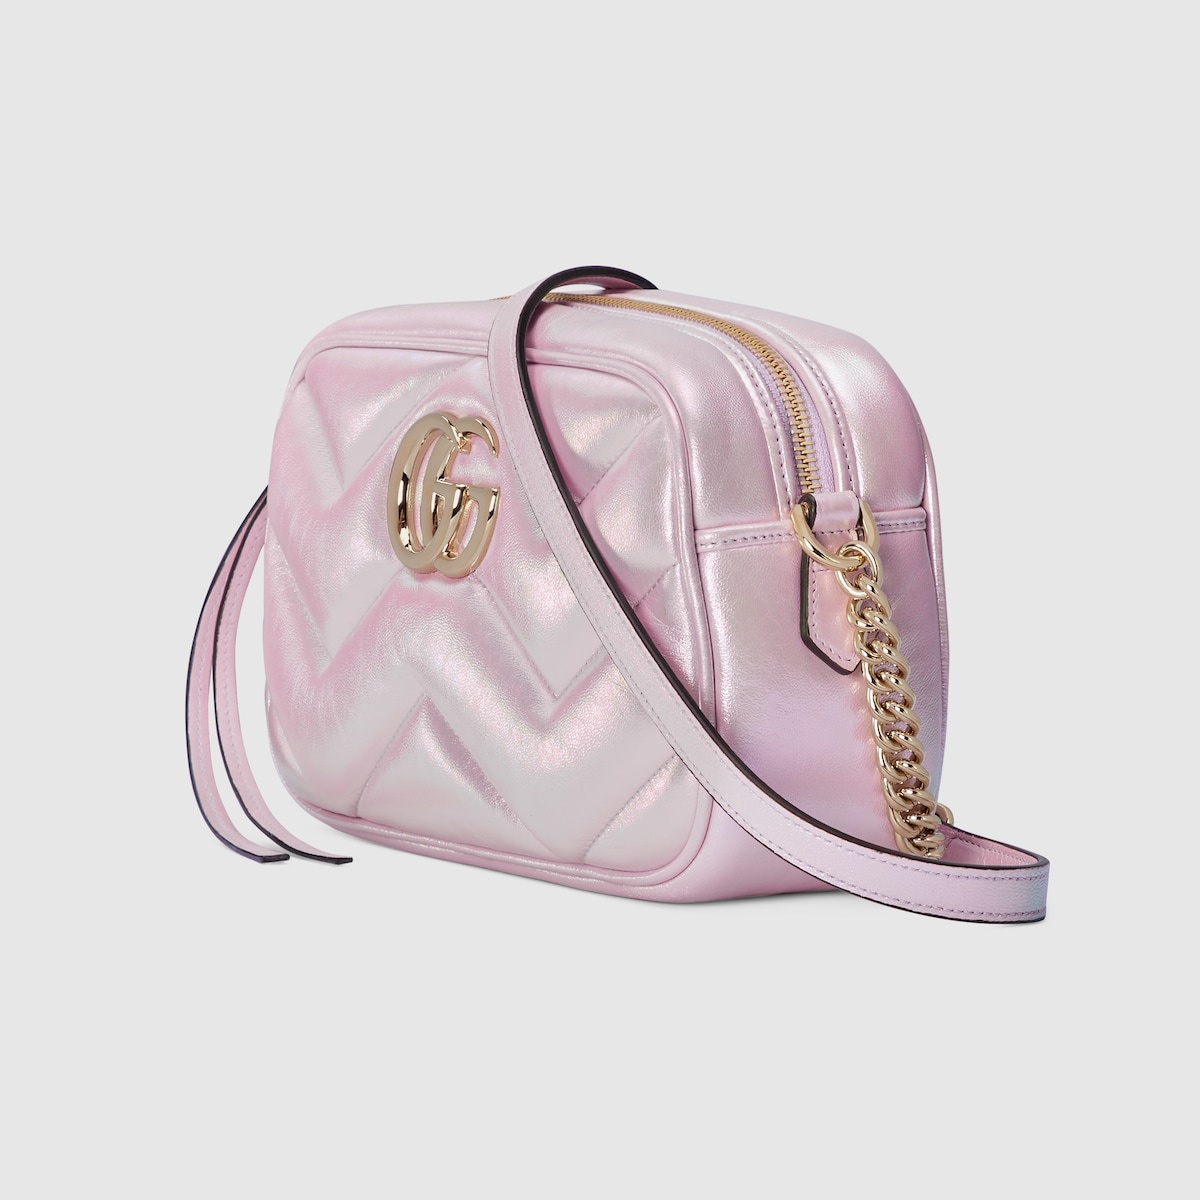 GG Marmont small shoulder bag - 2